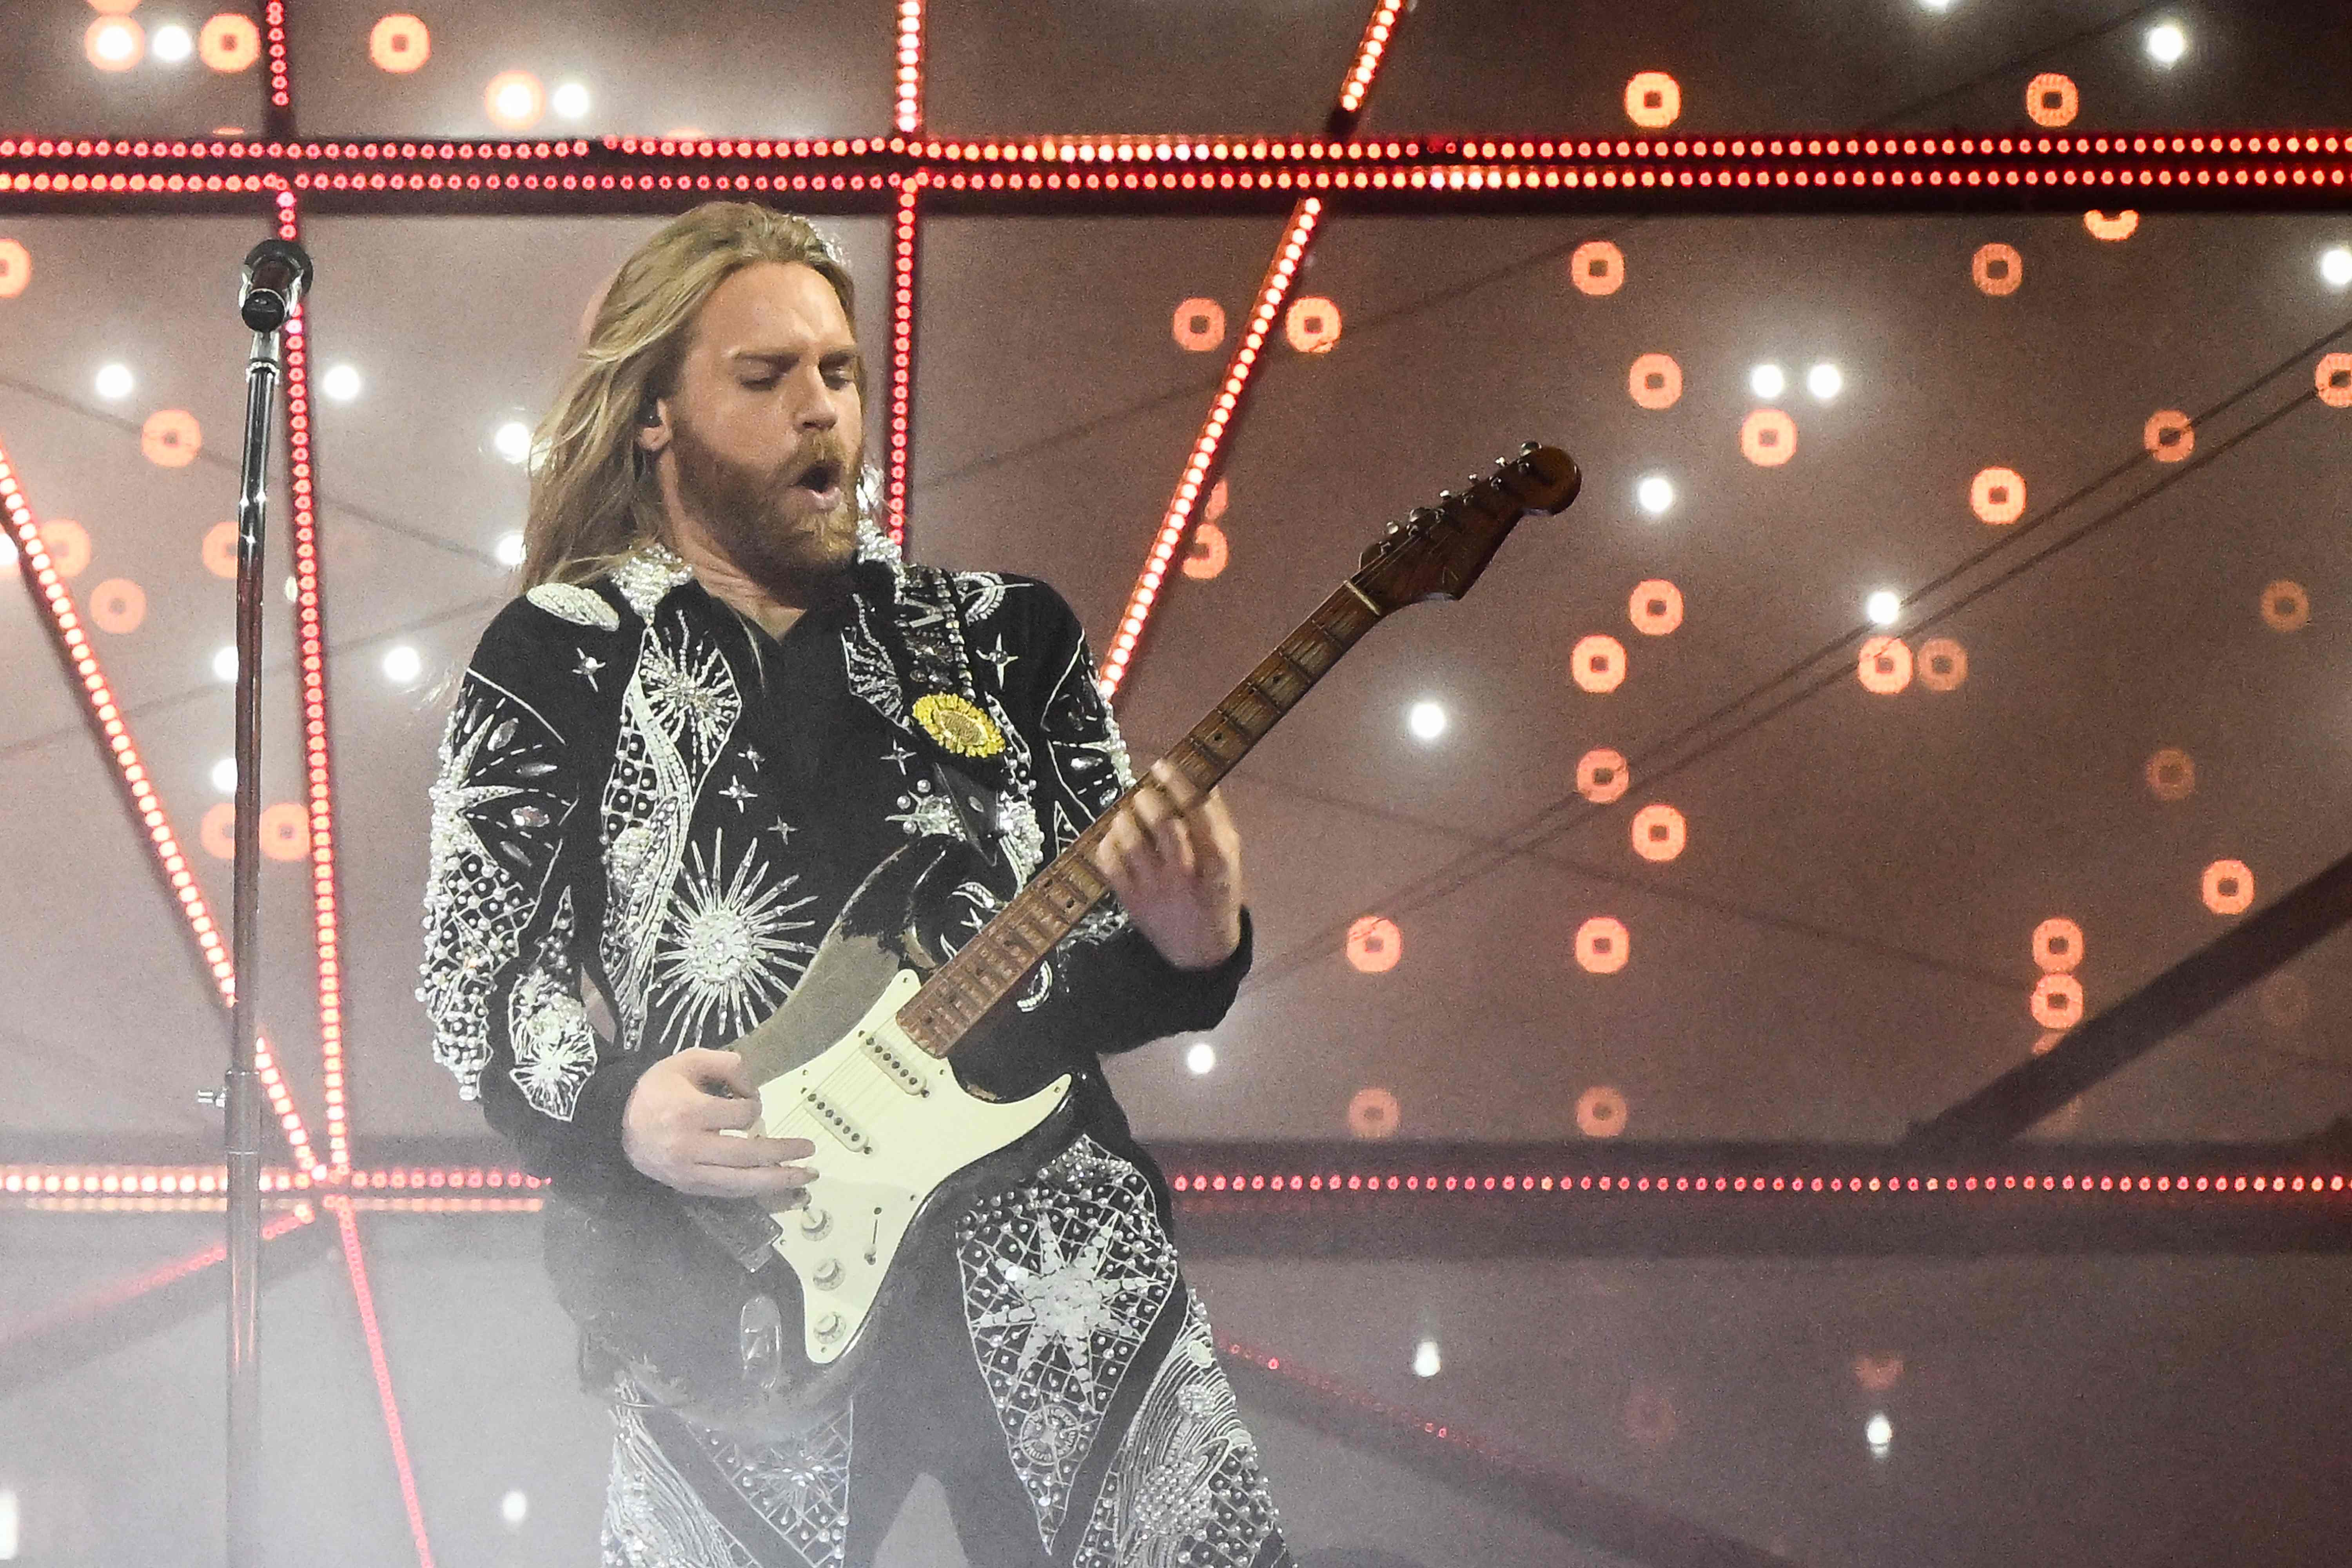 The UK’s Sam Ryder came second at this year’s Eurovision